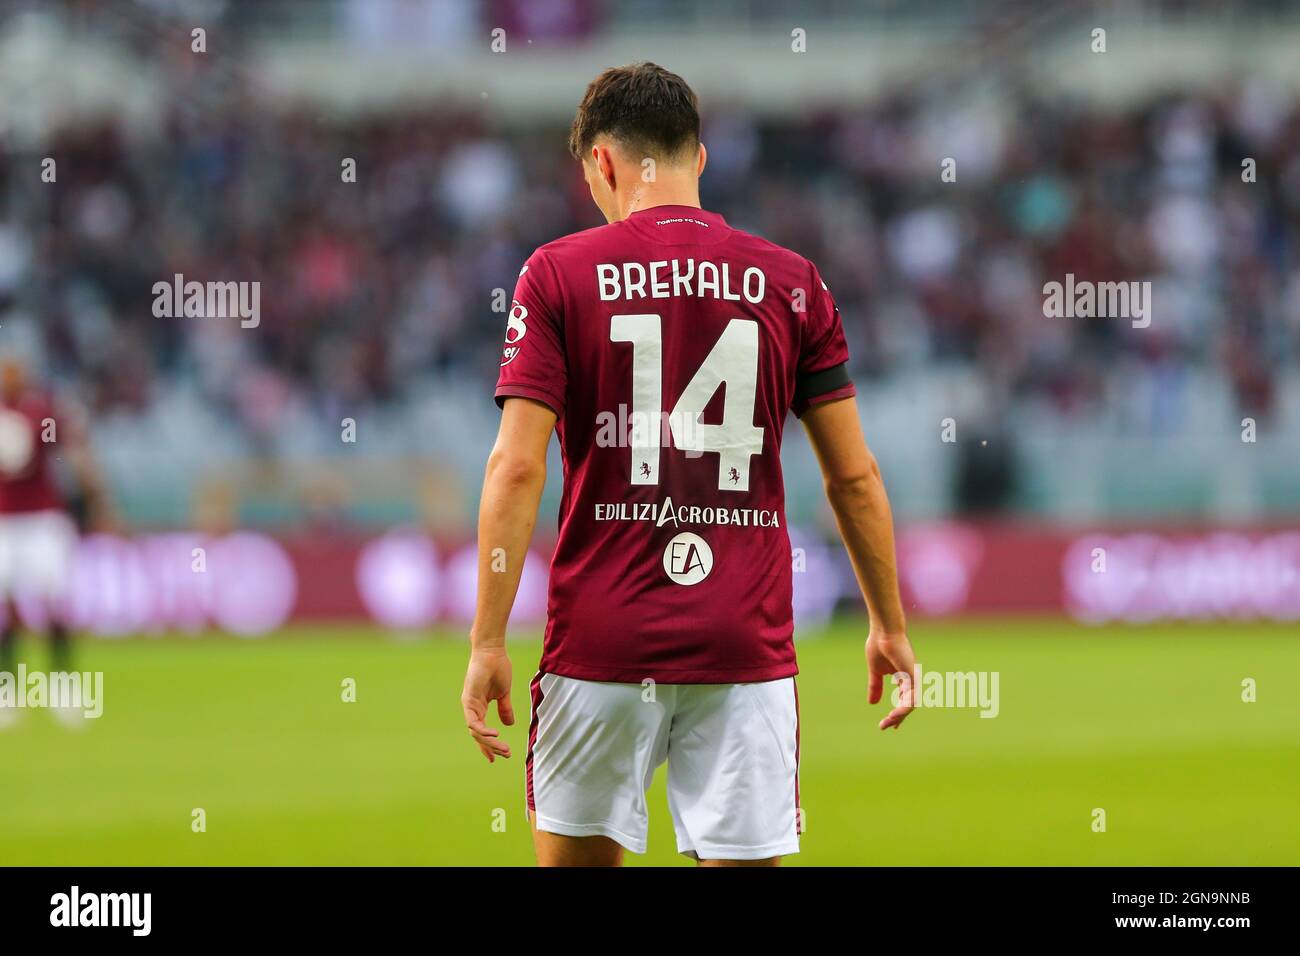 TURIN, ITALY. 23 SEPTEMBER 2021. Josip Brekalo of Torino FC during the Serie A match between Torino FC and SS Lazio BC on 23 September 2021 at Olympic Grande Torino Stadium. Credit: Massimiliano Ferraro/Medialys Images/Alamy Live News Stock Photo